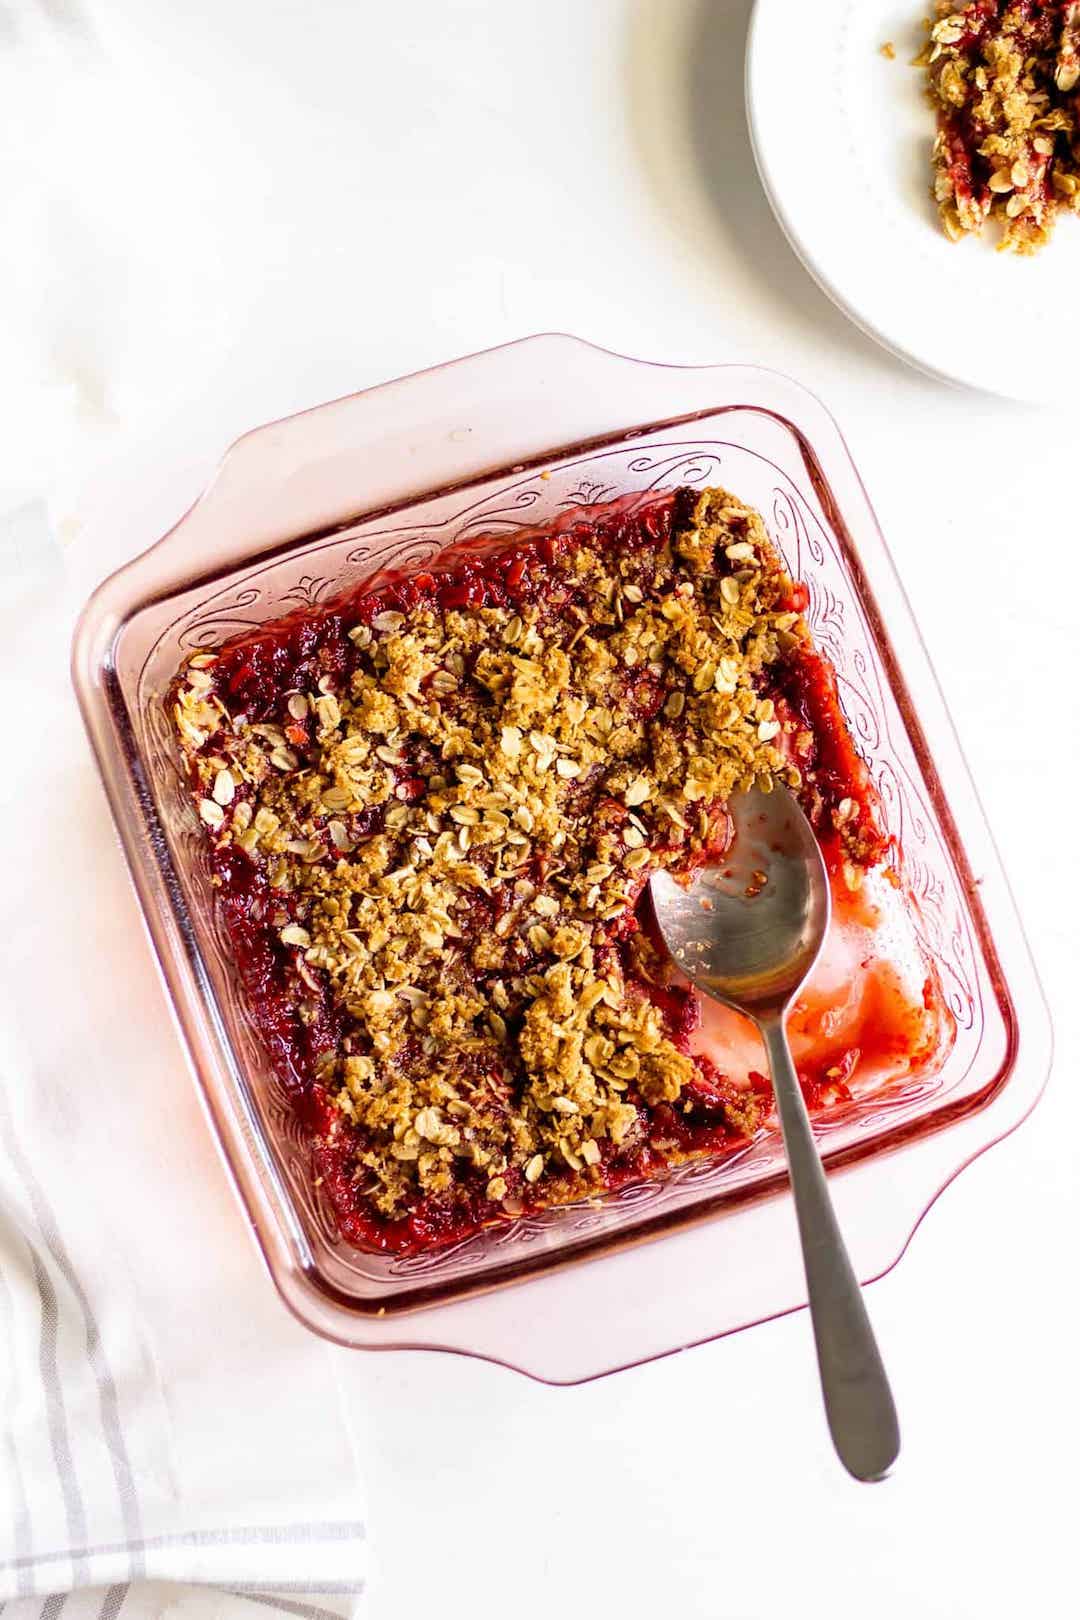 glass dish filled with strawberry crumble and a silver spoon